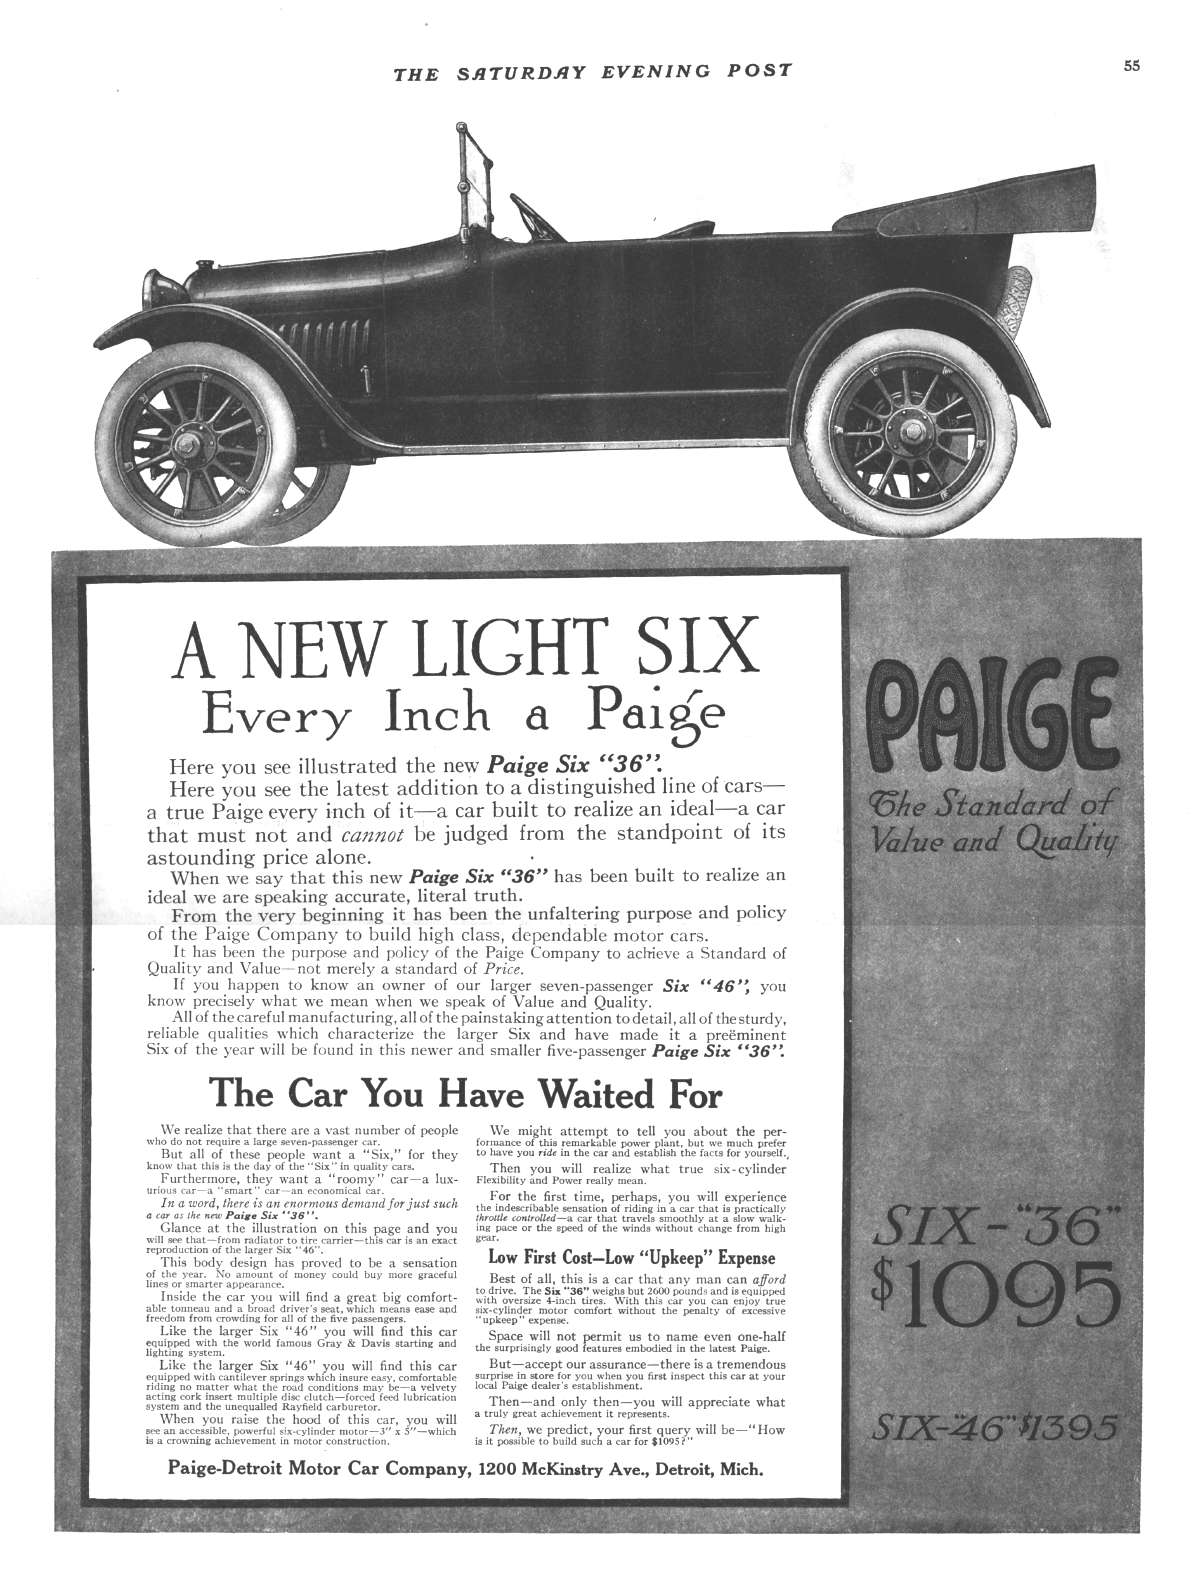 1915 Paige Hollywood 6-36